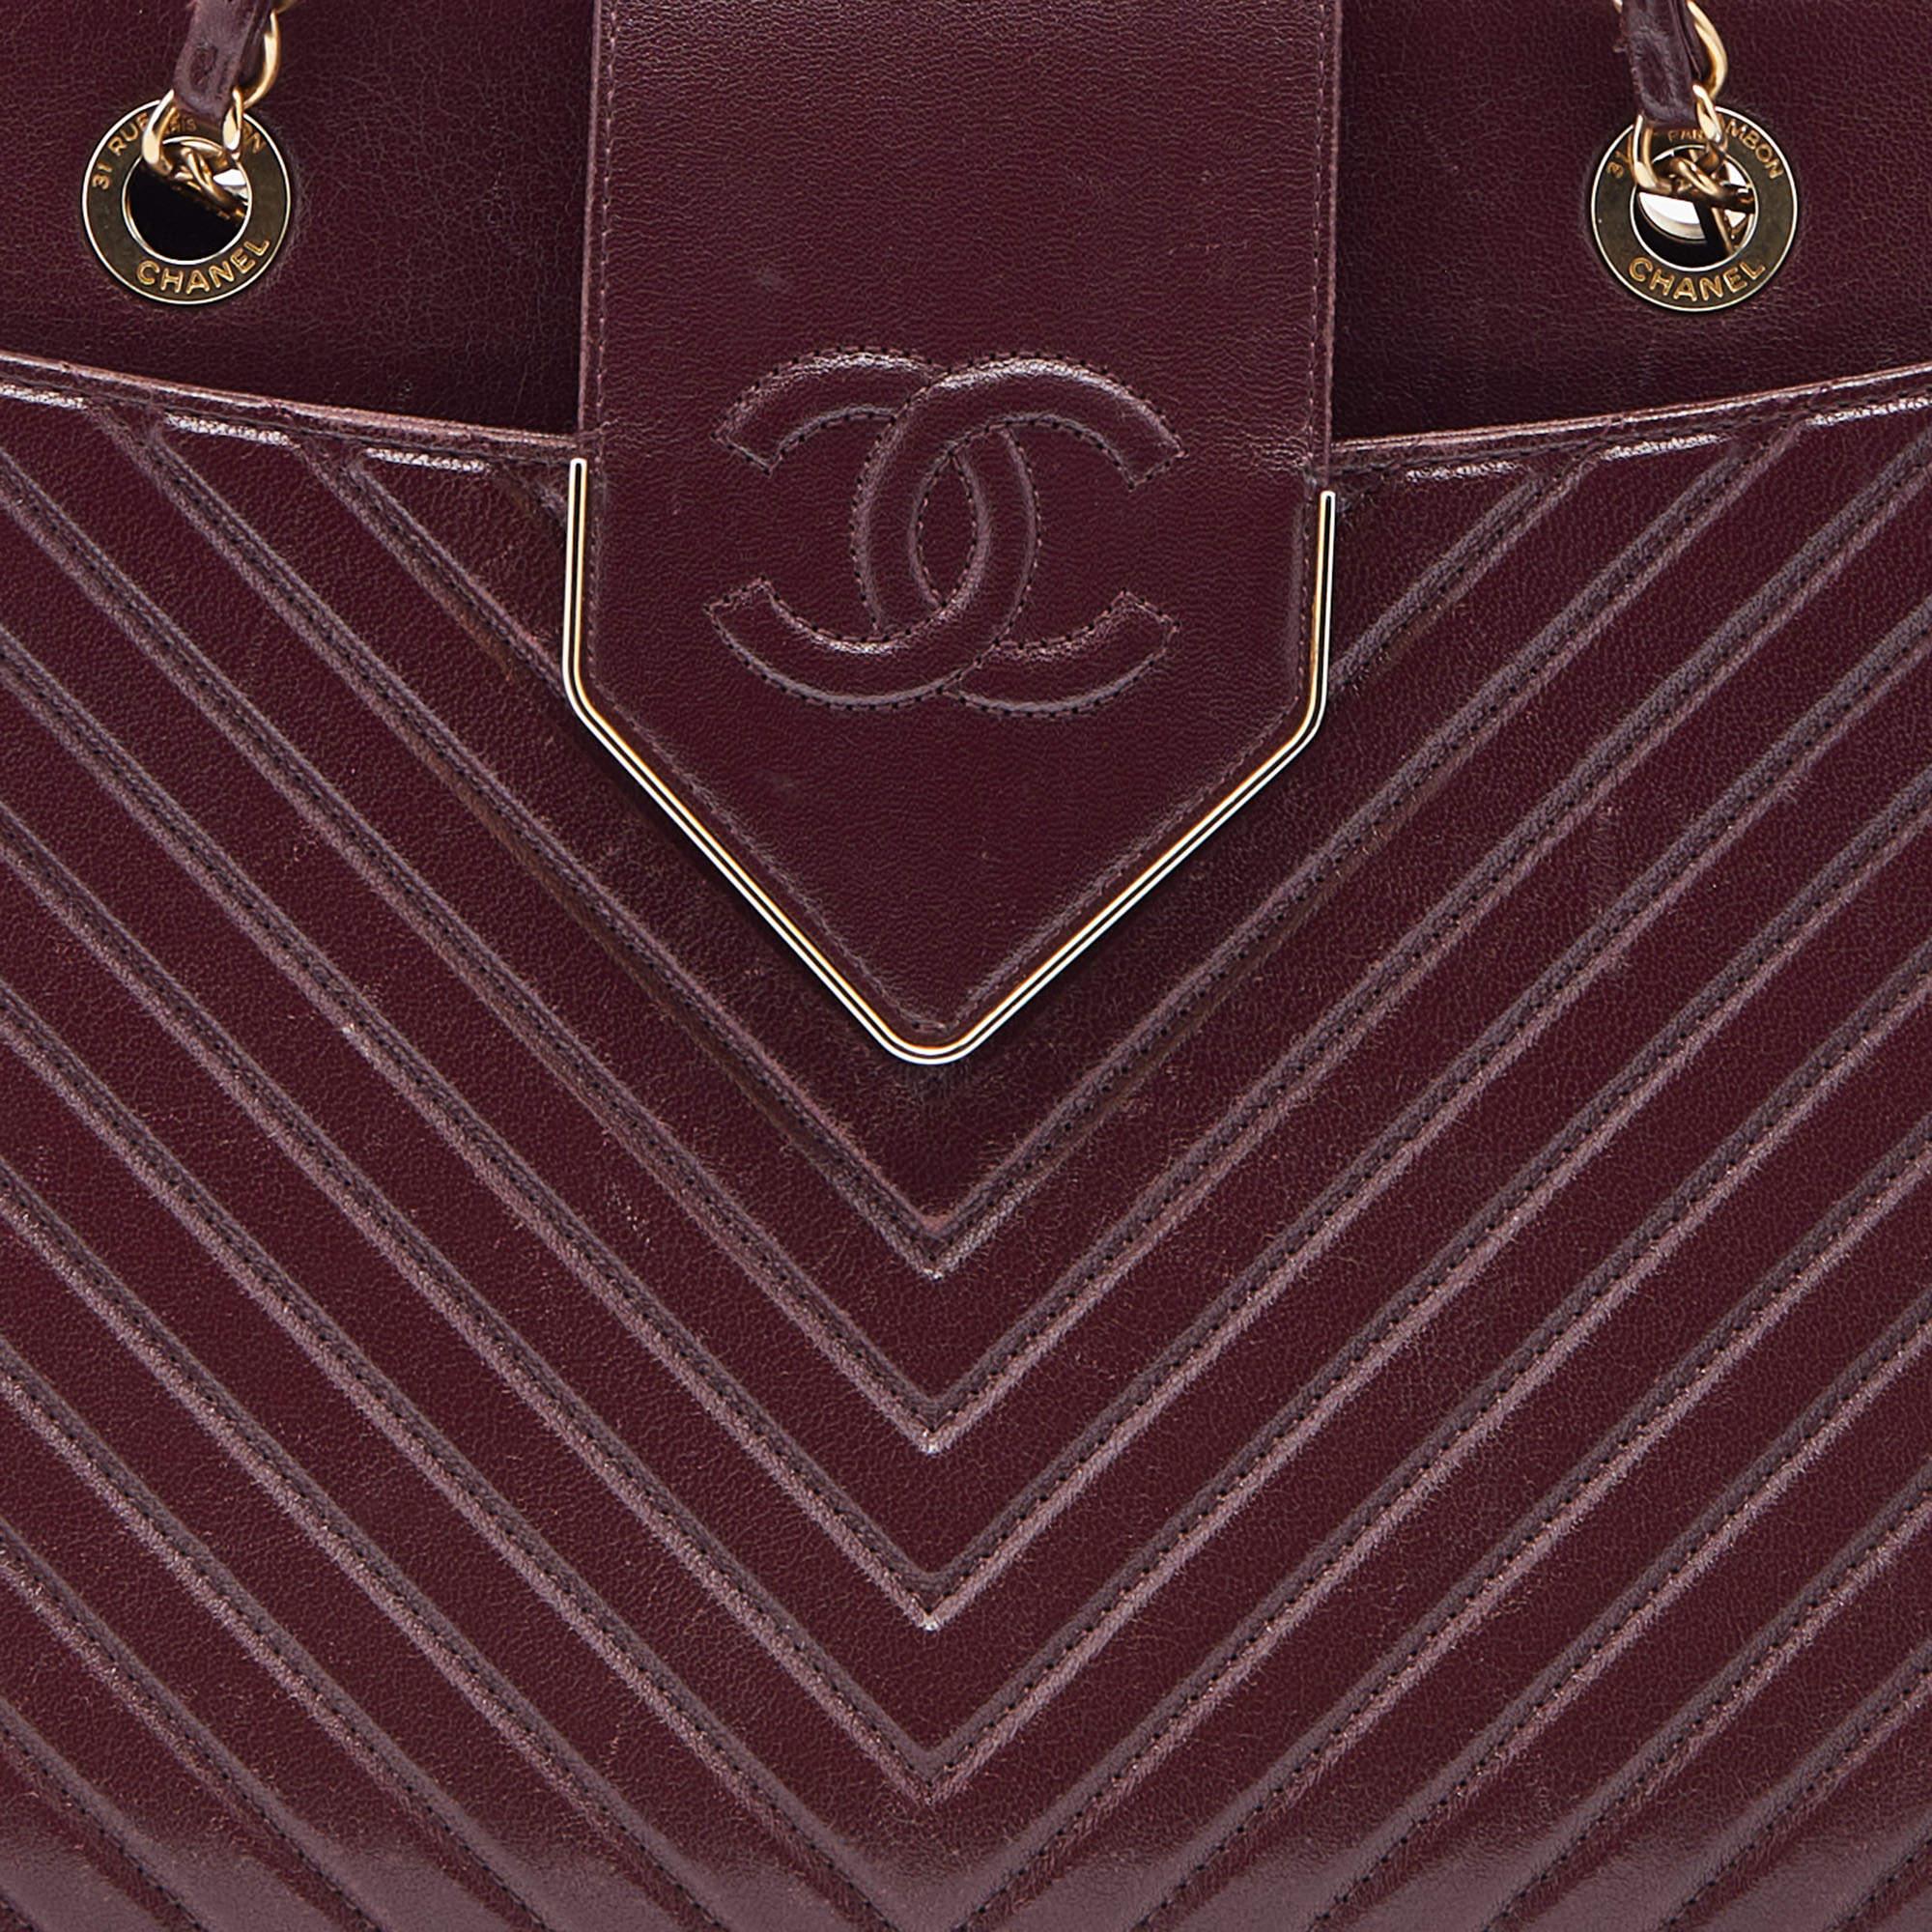 Chanel Burgundy Chevron Quilted Leather Collar and Tie Flap Bag 6